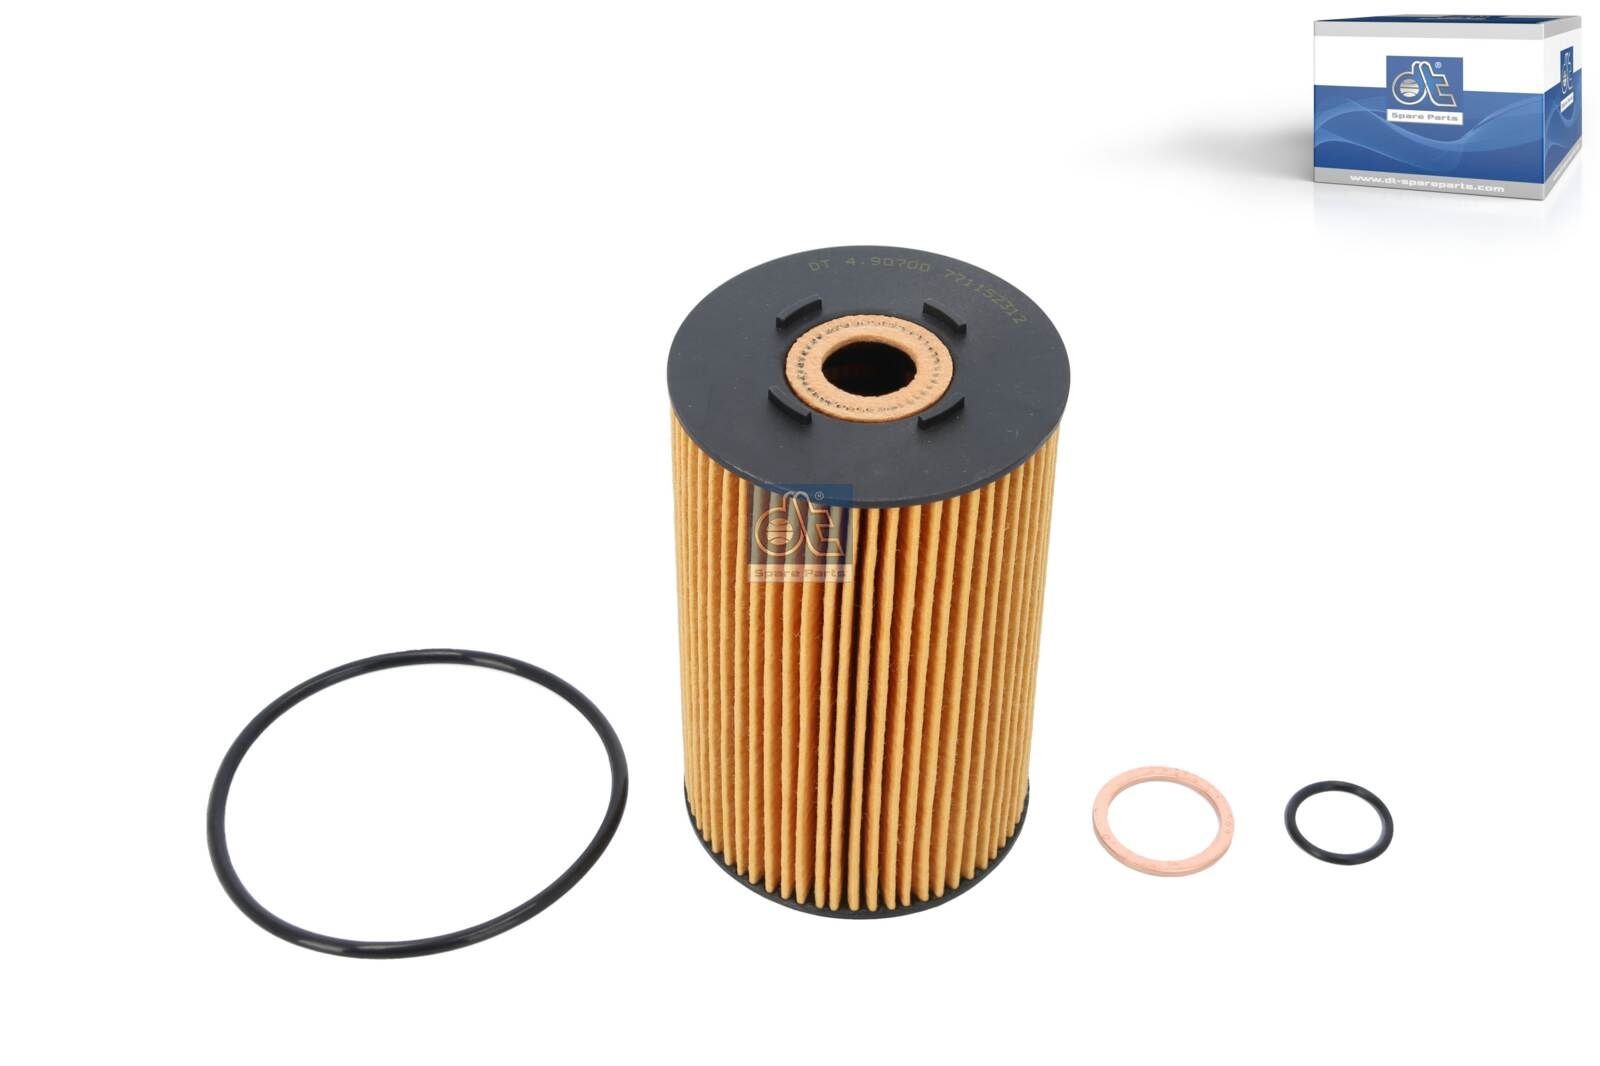 HU 932/4 n DT Spare Parts 4.90700 Oil filter A366 180 06 09